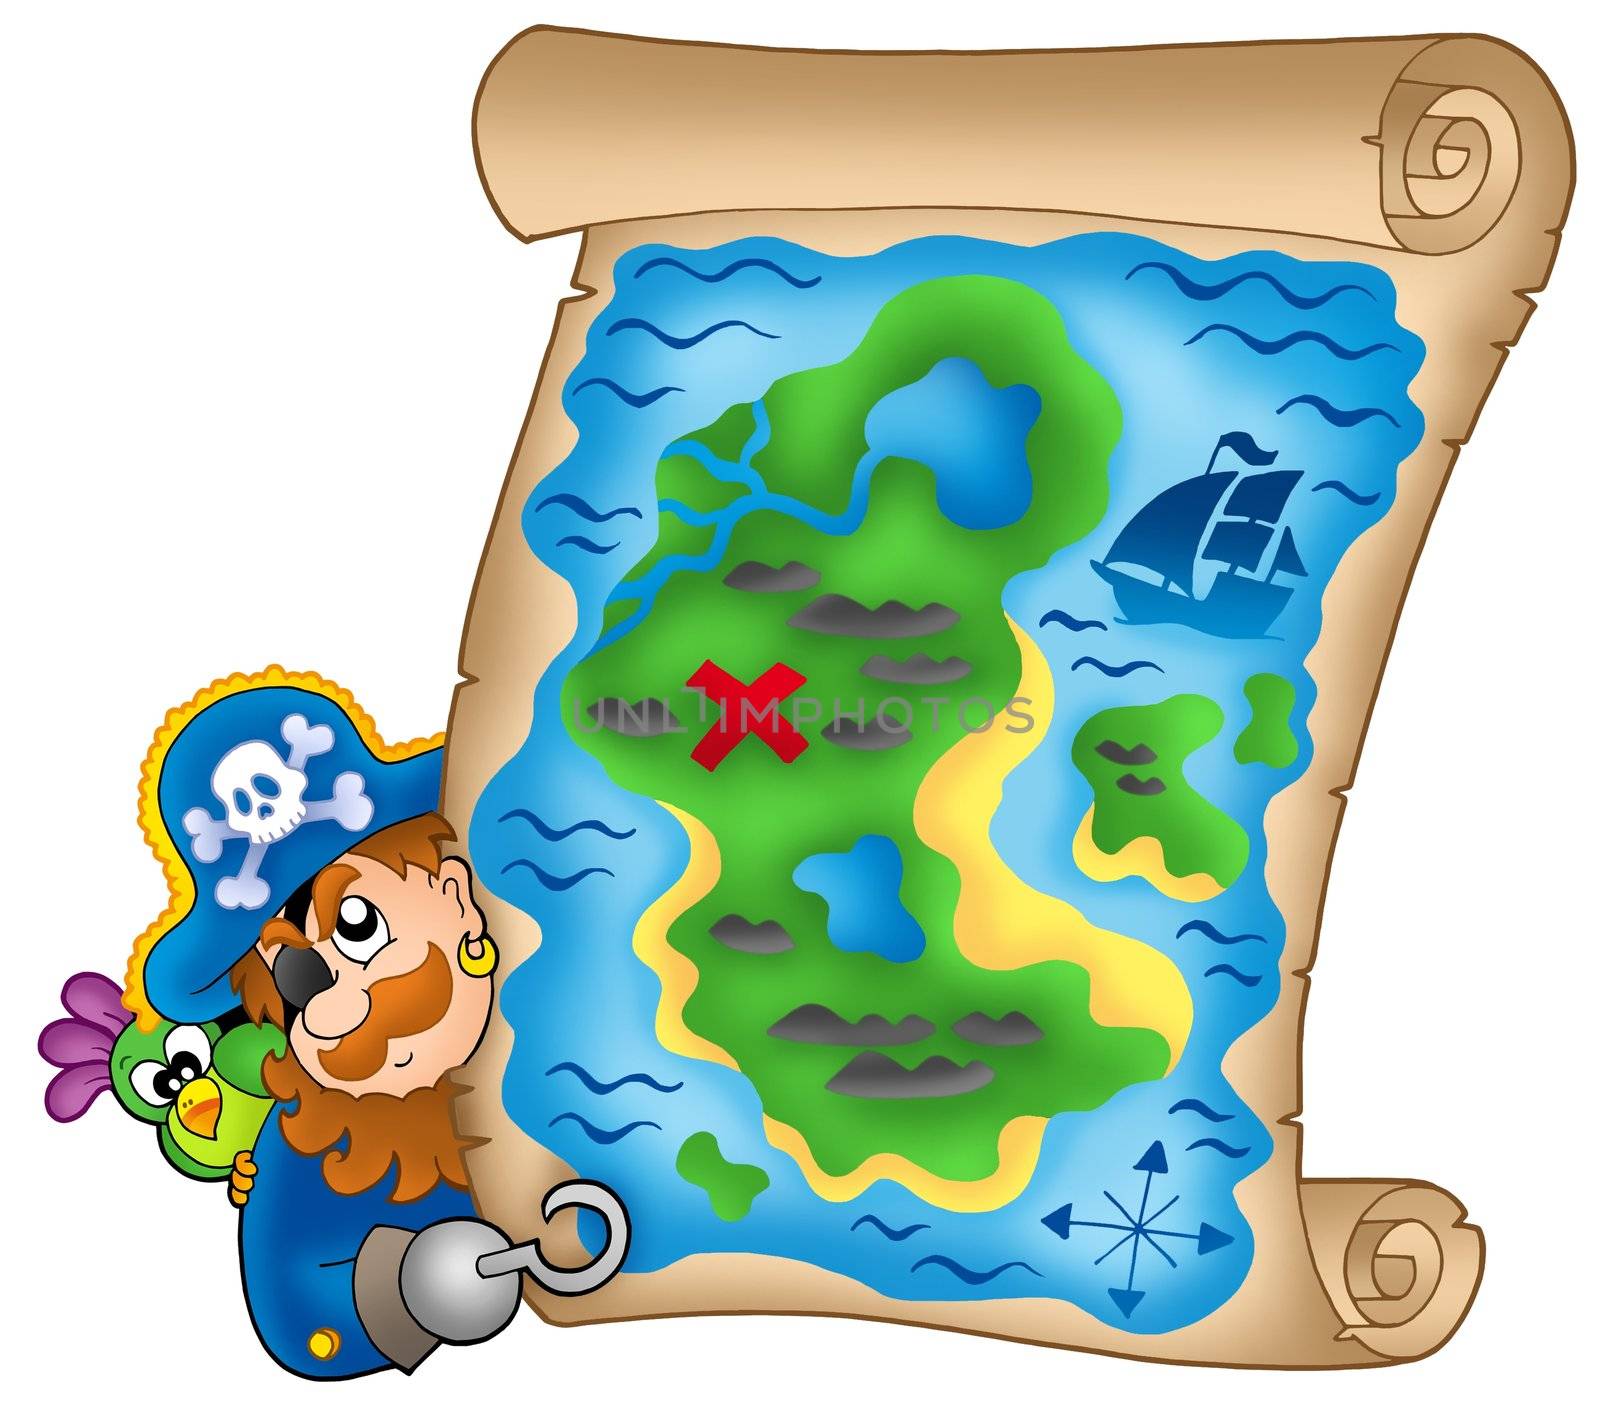 Treasure map with lurking pirate - color illustration.